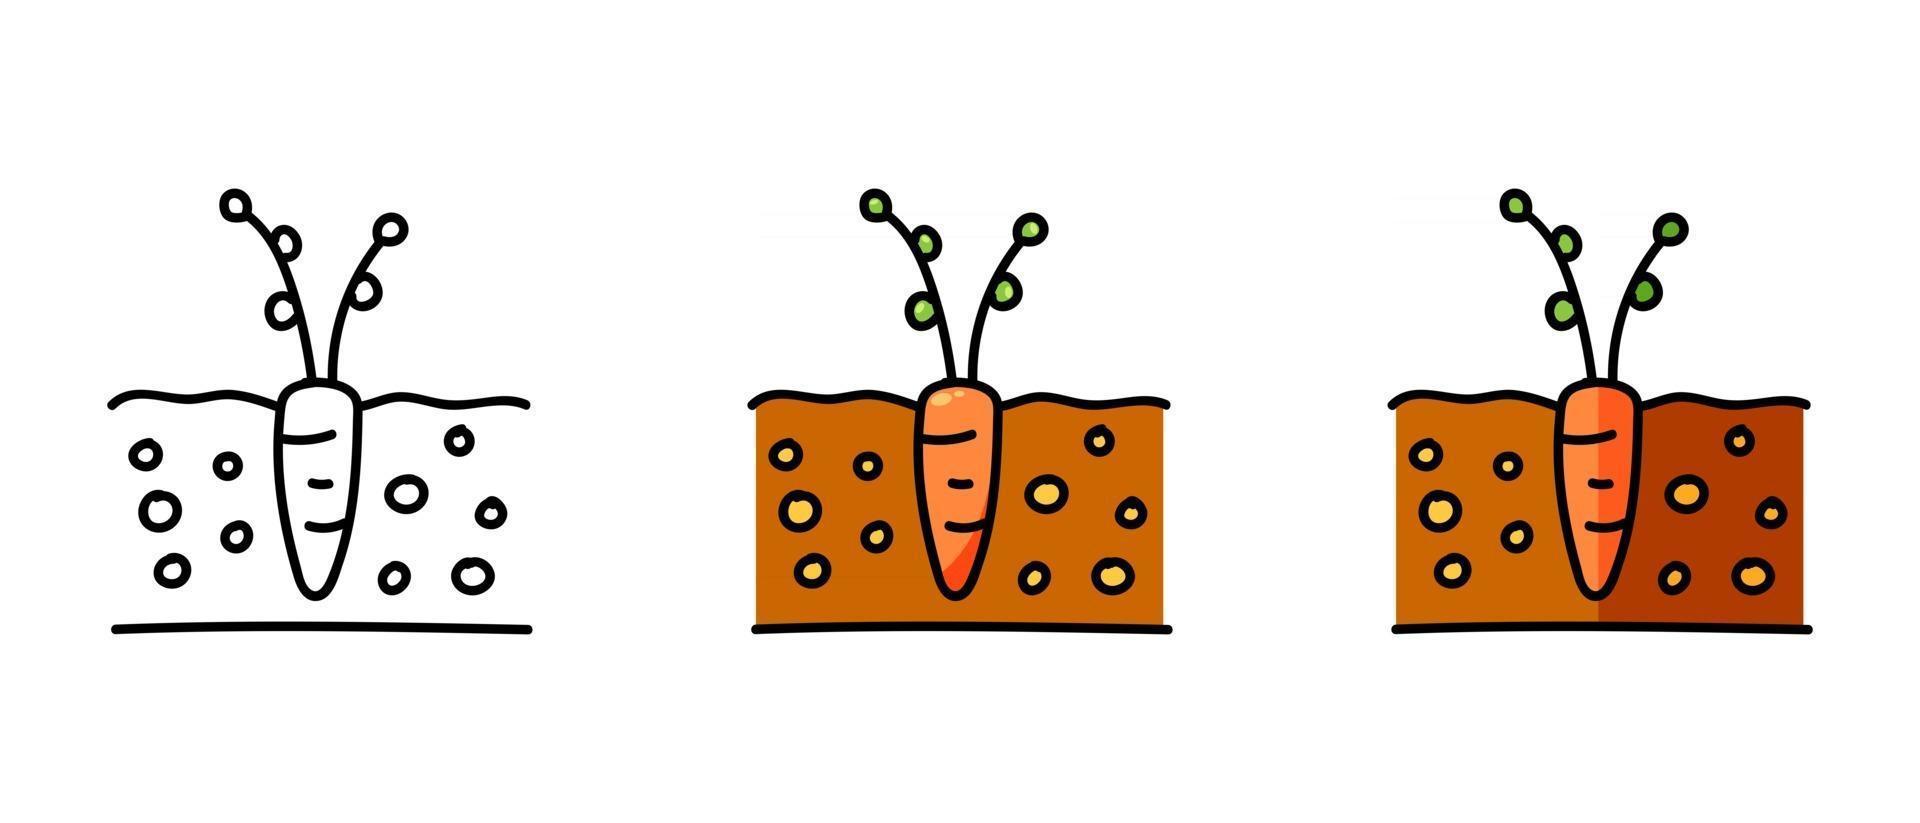 Contour and color symbols of a carrot seedling vector